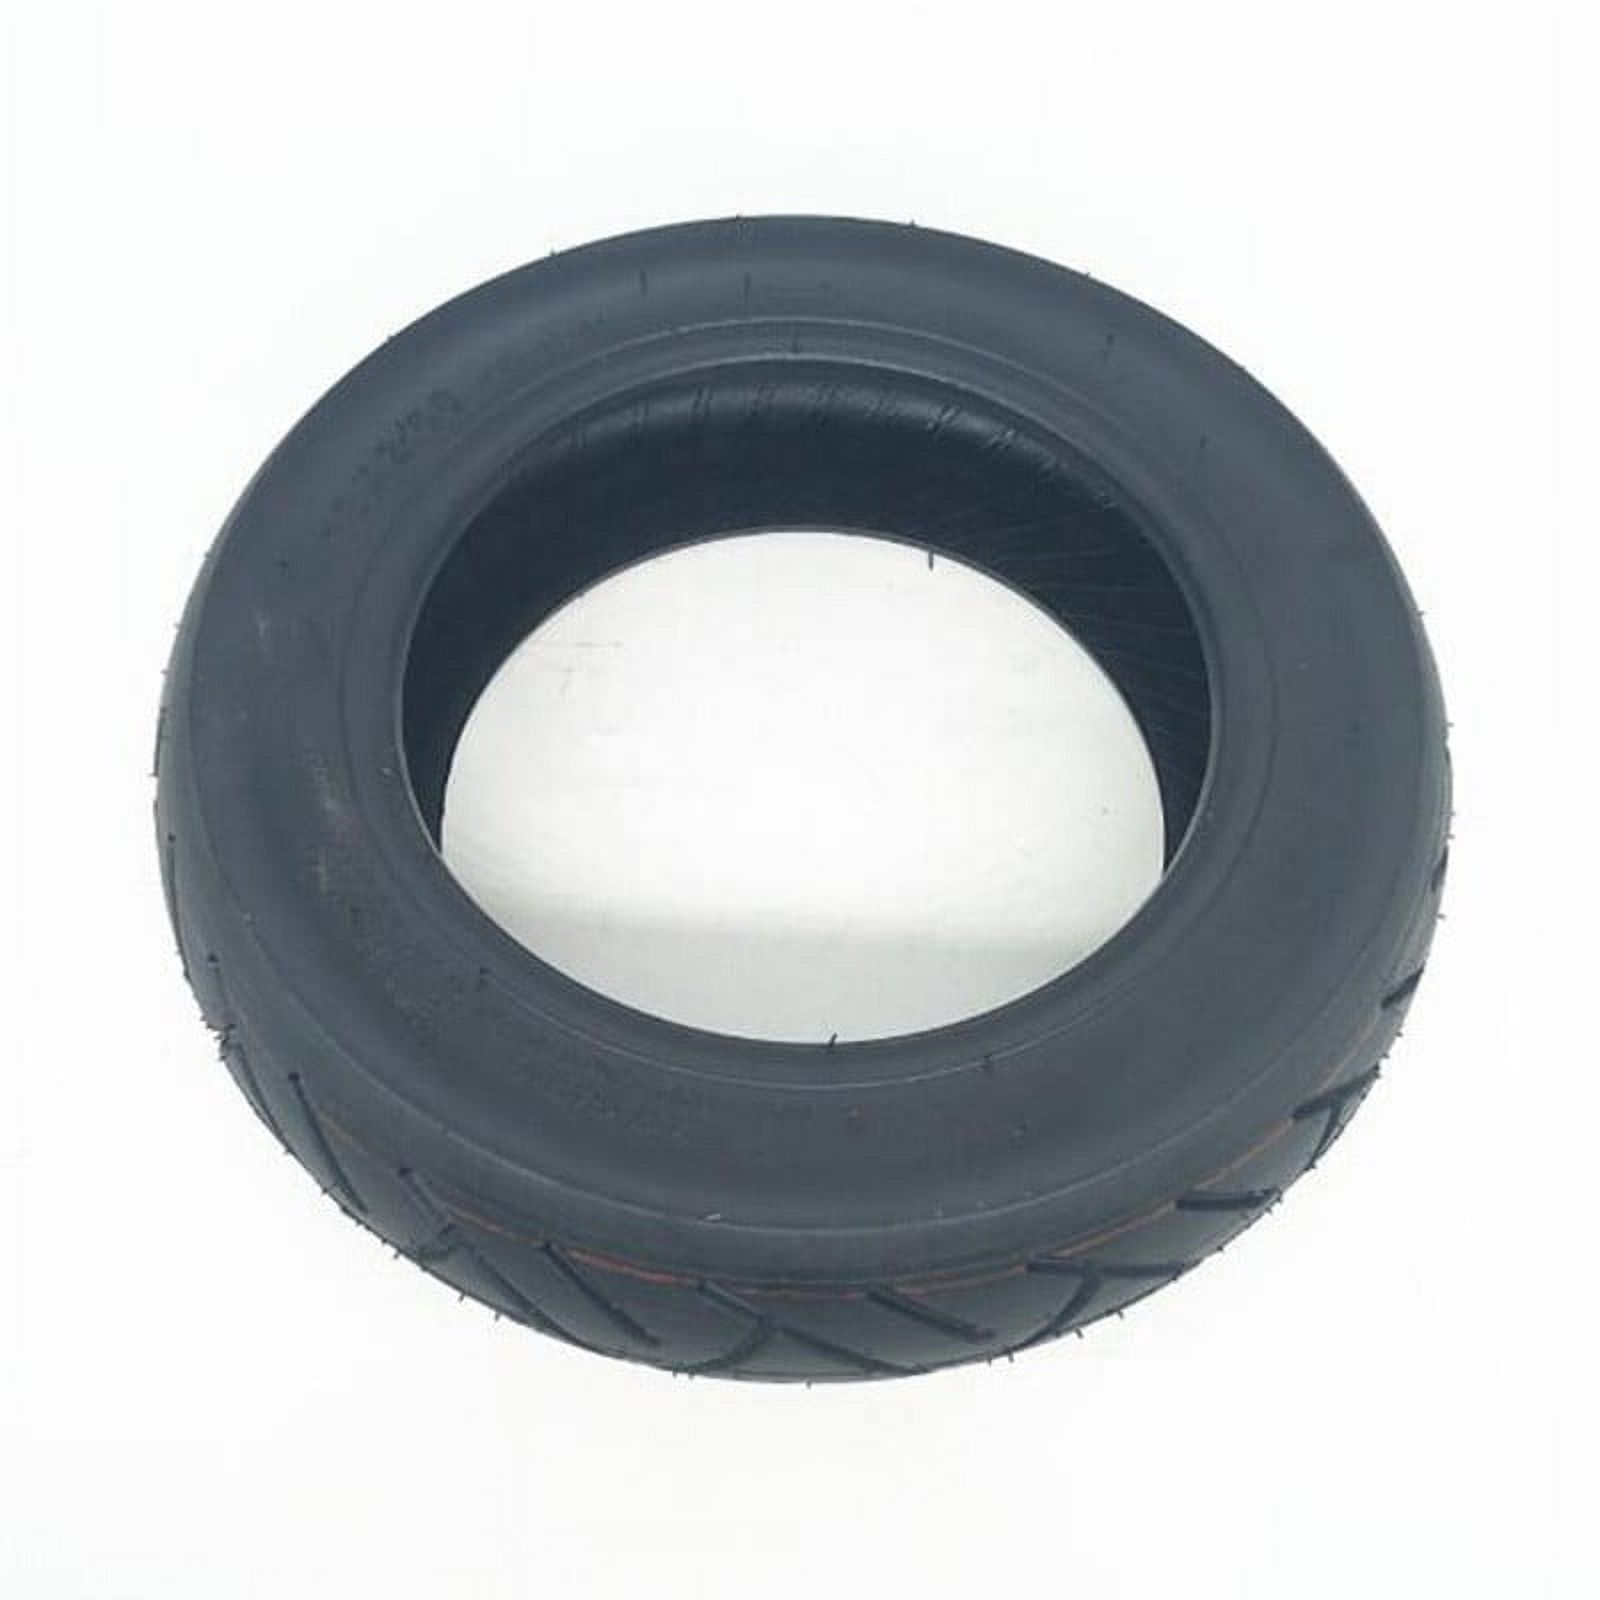 Electric Scooter Tire Rubber 10X2.50 Inner Tube Spare Replacement Parts - image 1 of 7